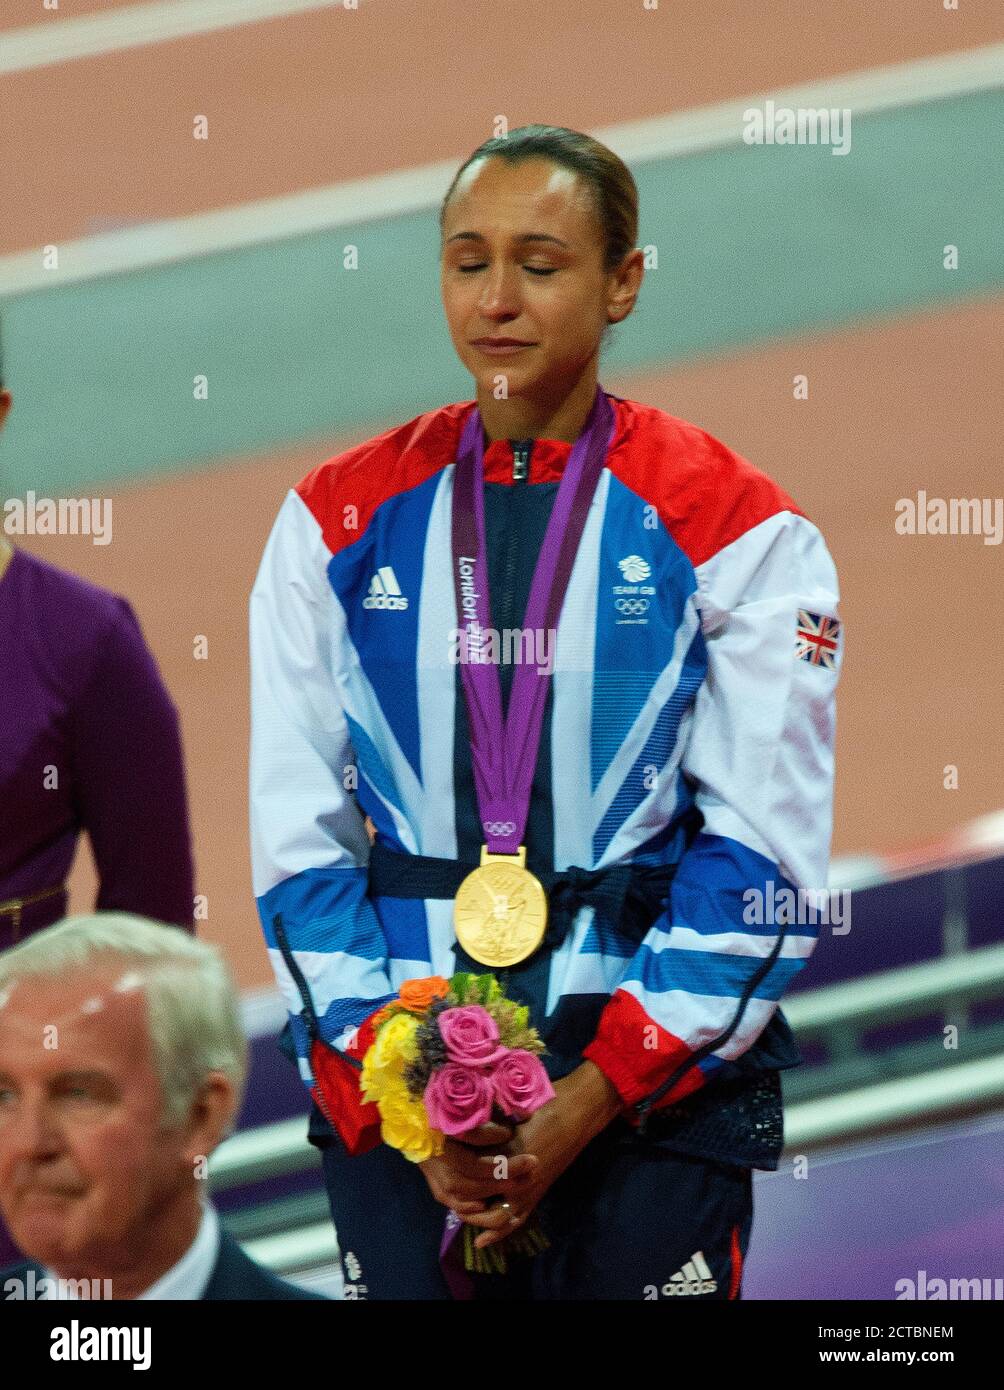 Jessica Ennis 2012 Medal Gold Hi Res Stock Photography And Images Alamy